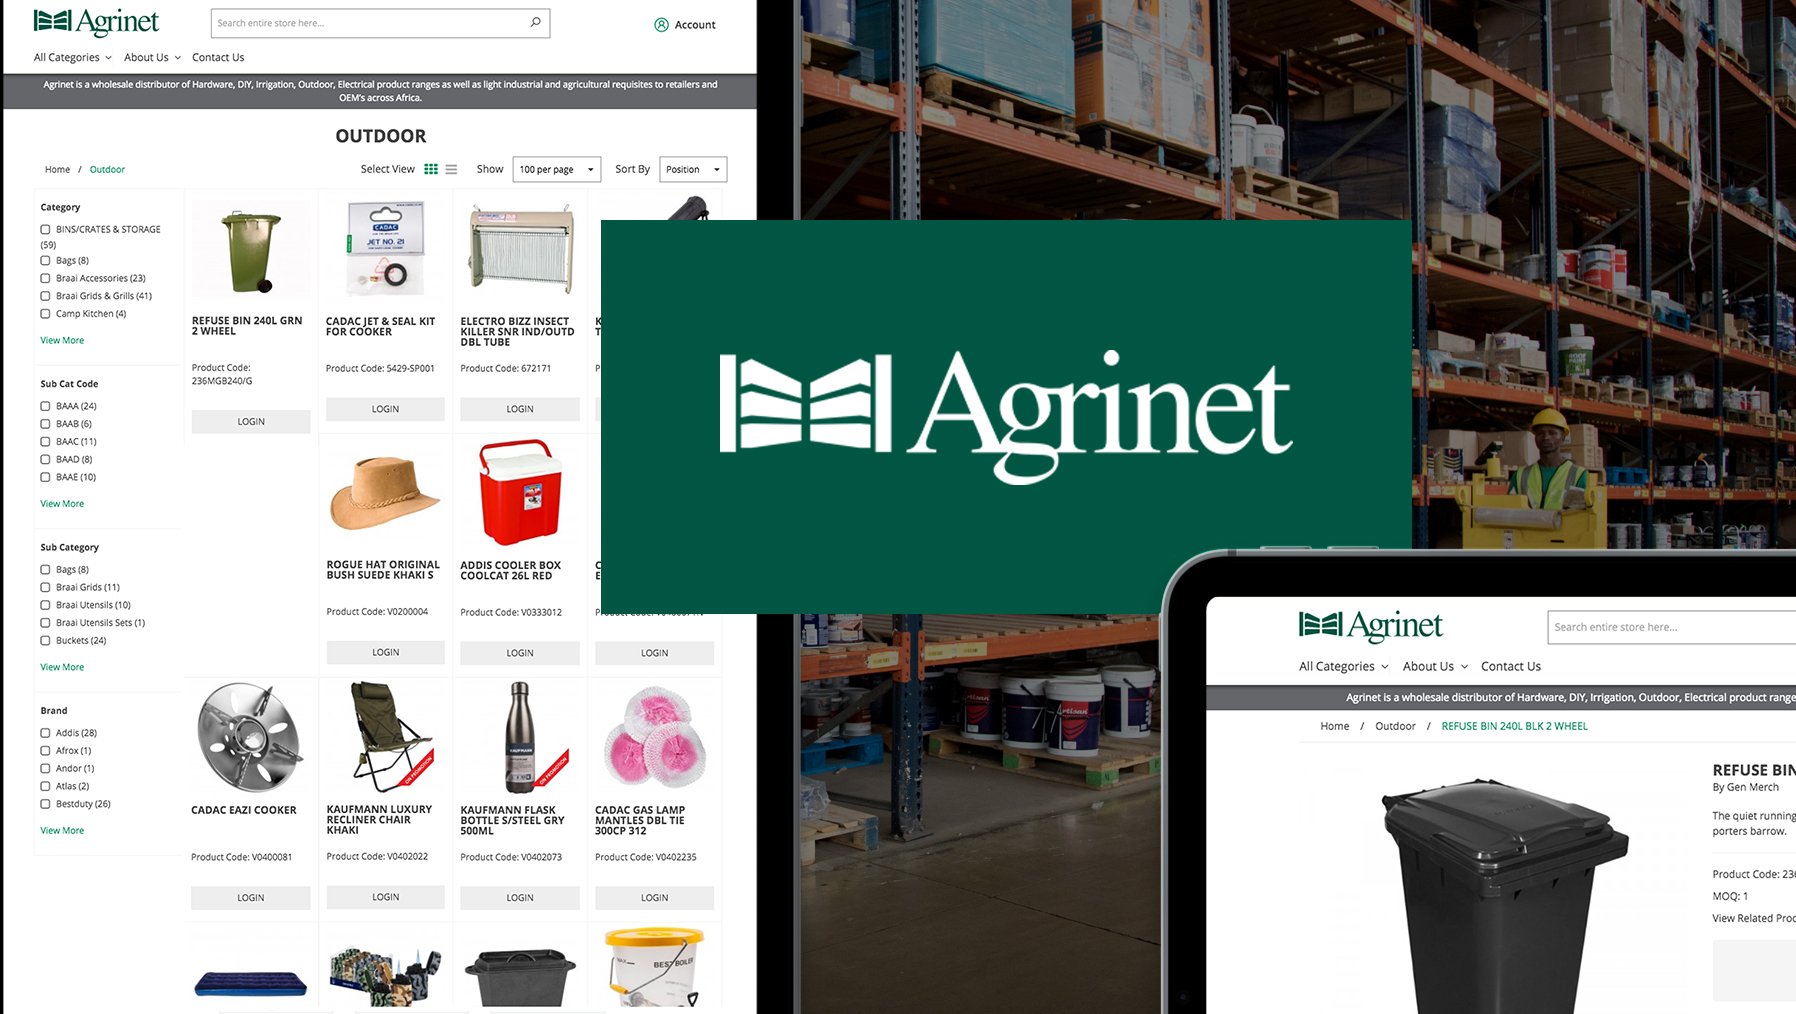 Agrinet B2B ecommerce website by Vaimo